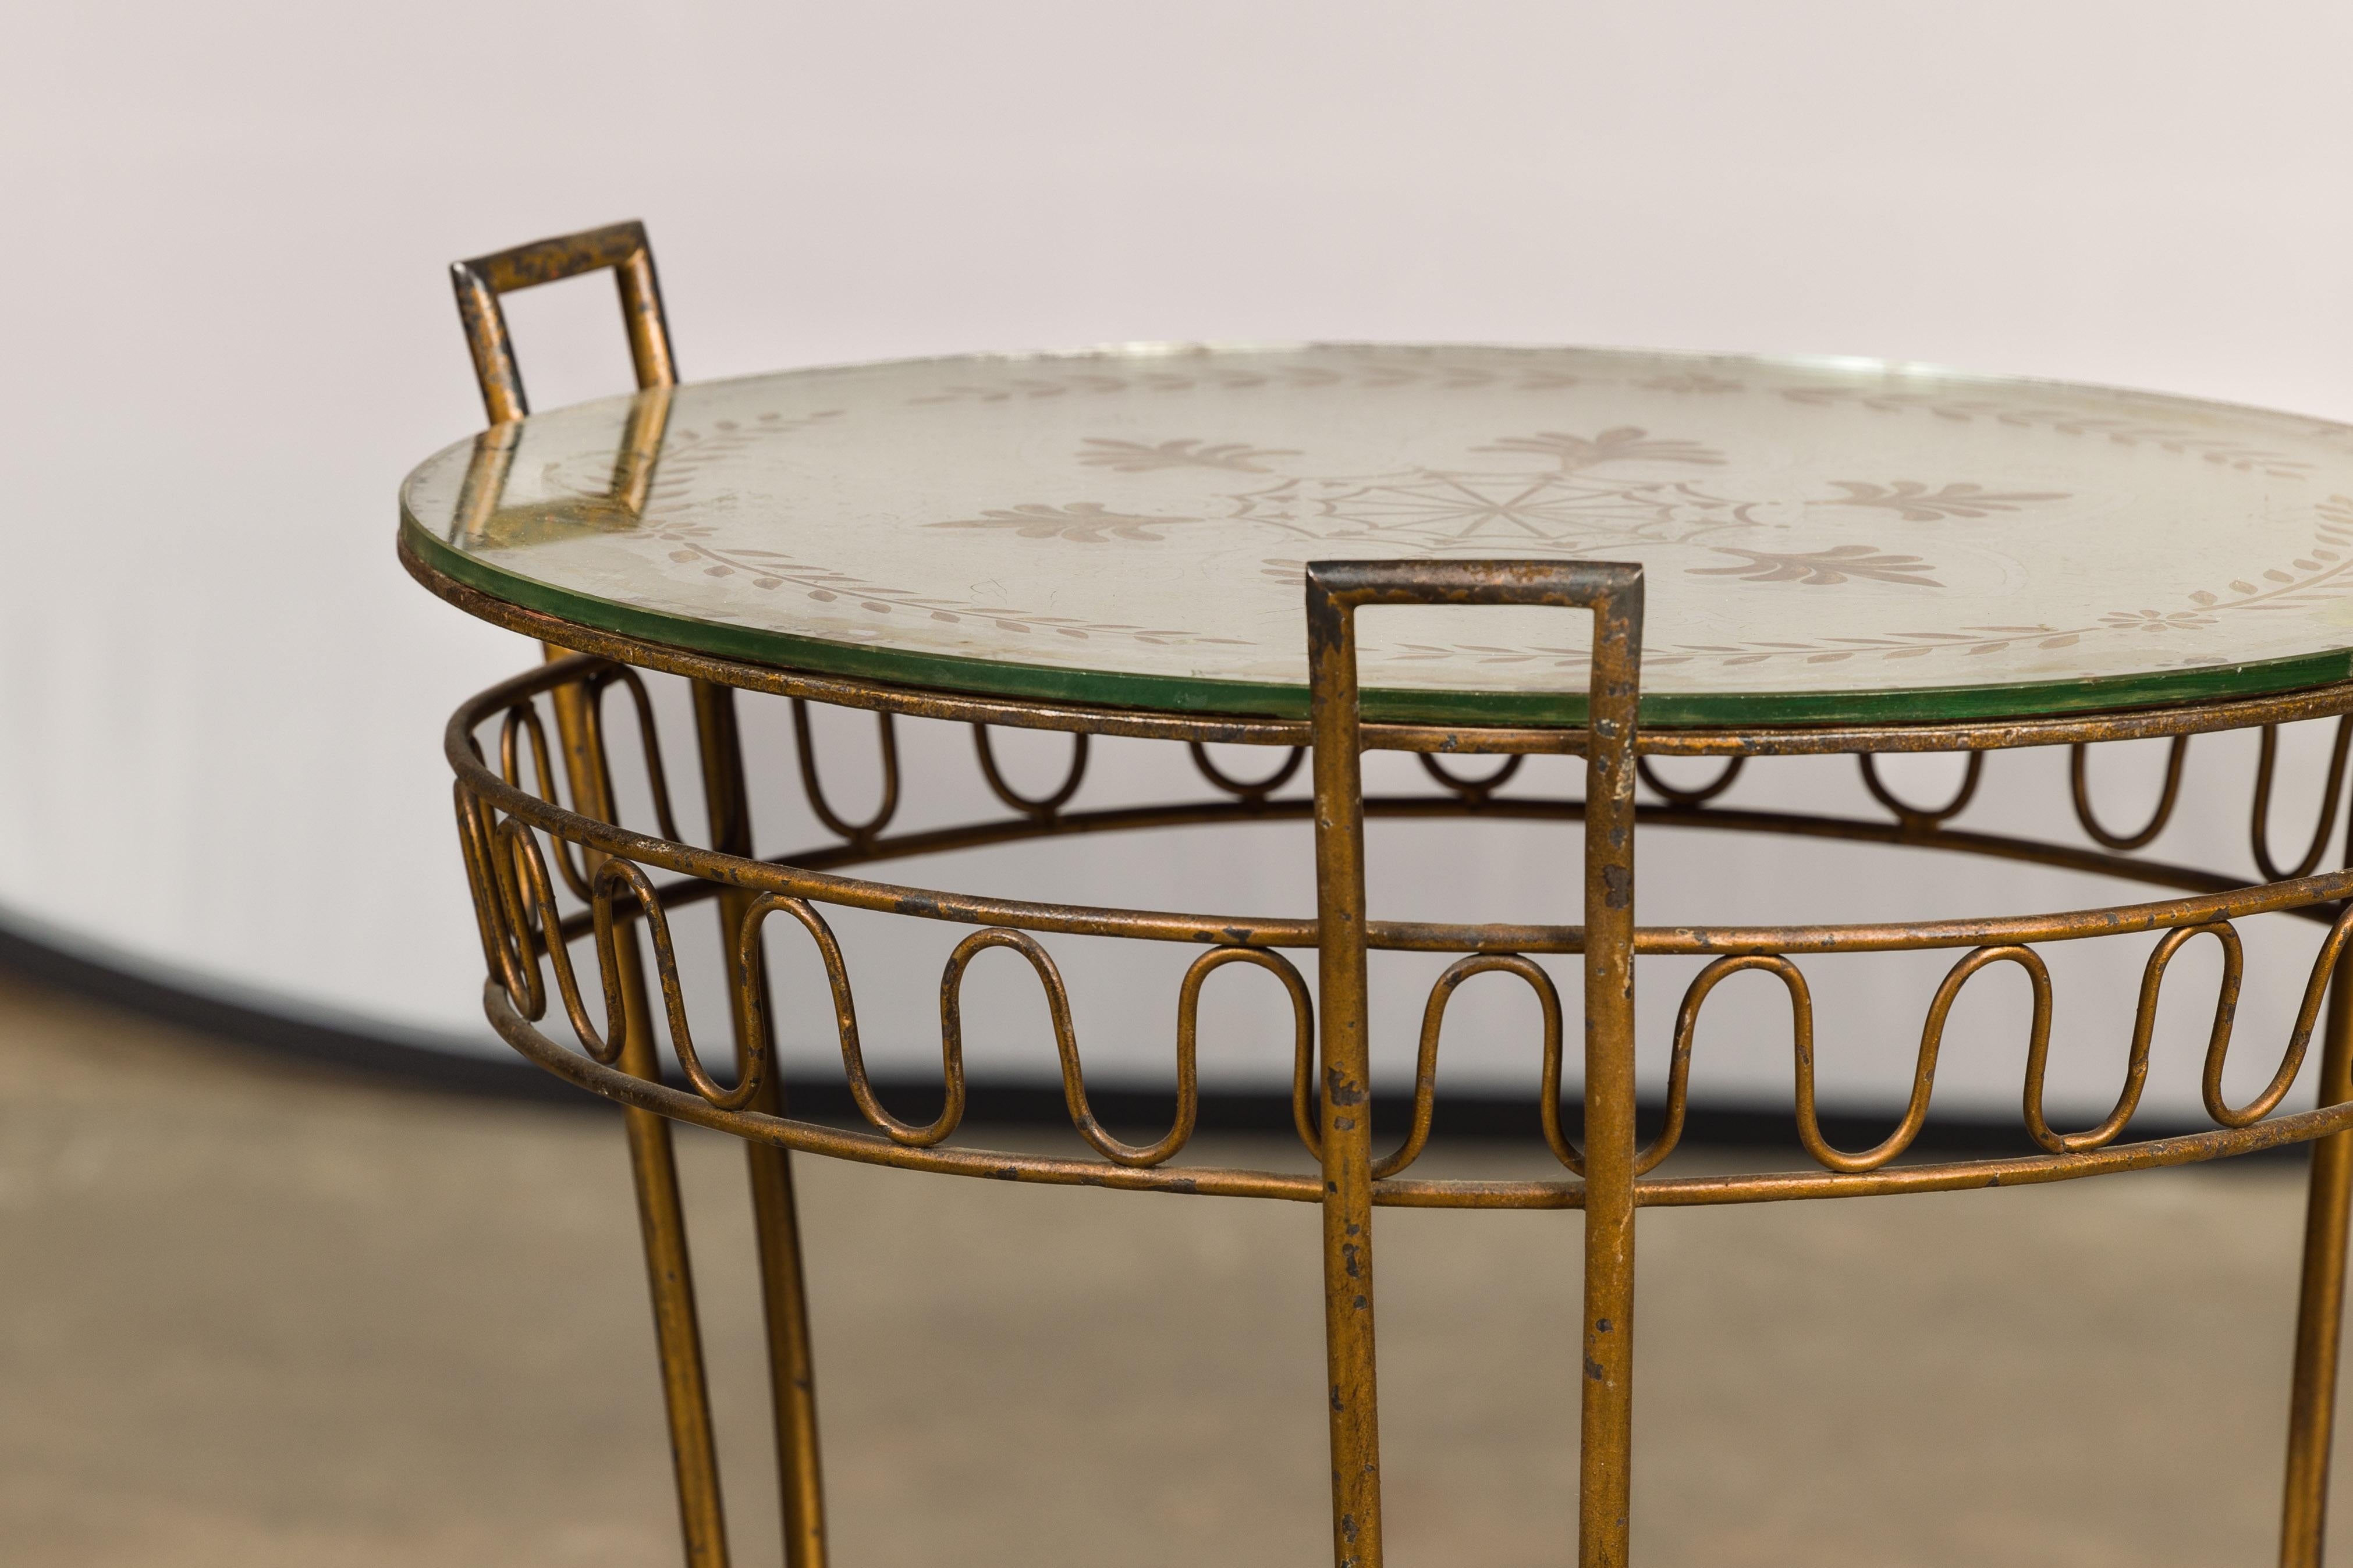 French 1920s Gilt Iron Side Table with Etched Foliage Mirrored Top and Low Shelf For Sale 5